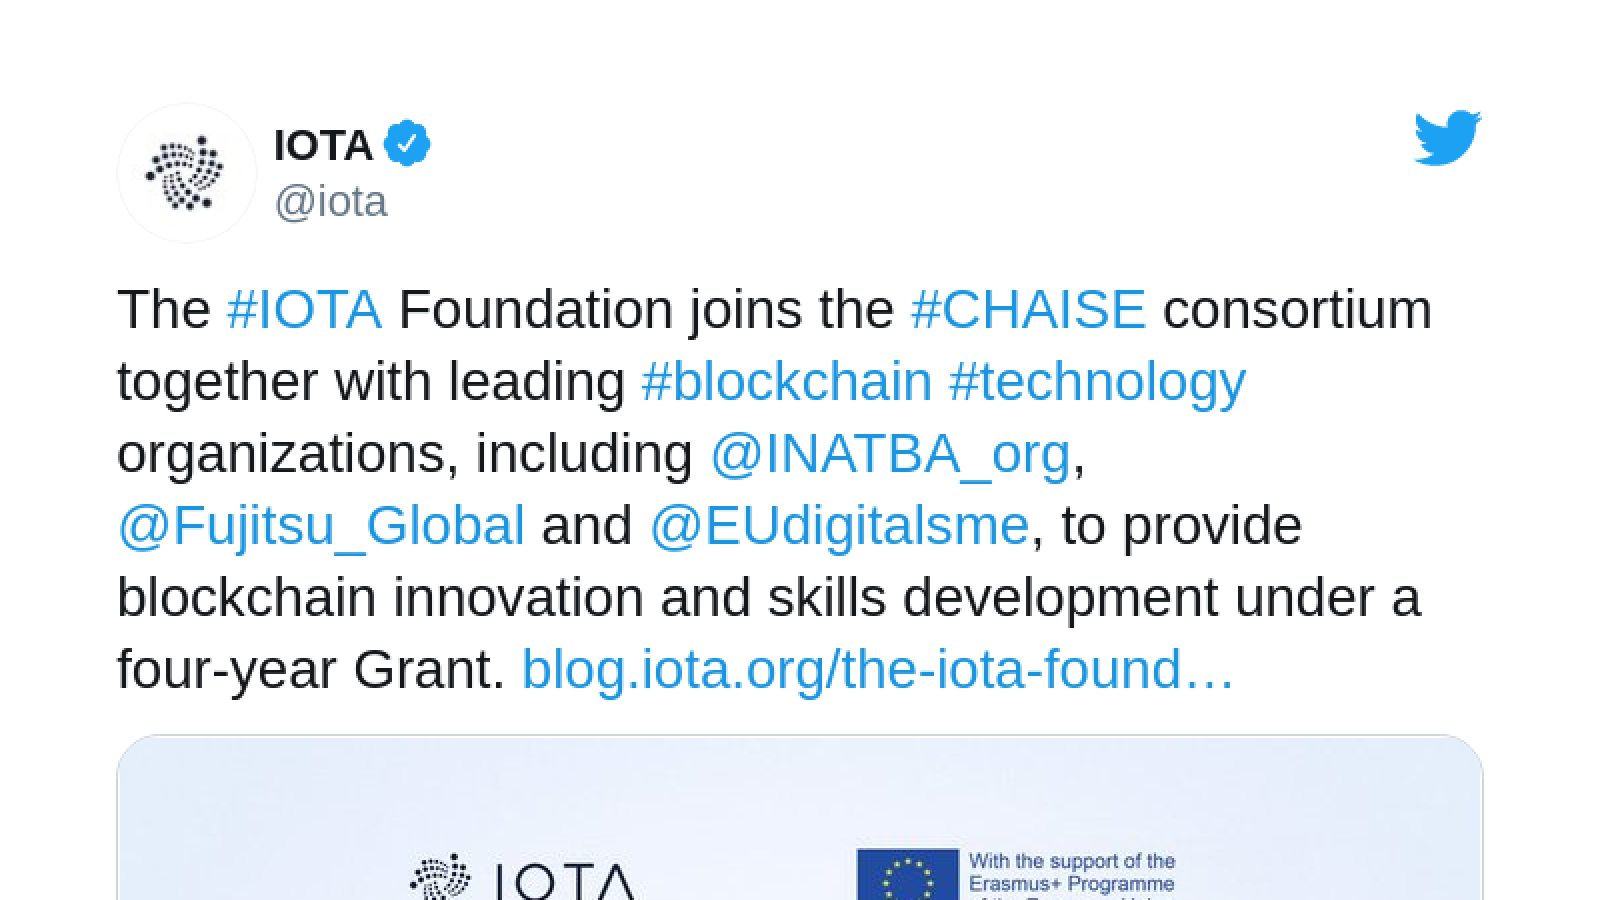 IOTA Foundation is now a member of the CHAISE consortium